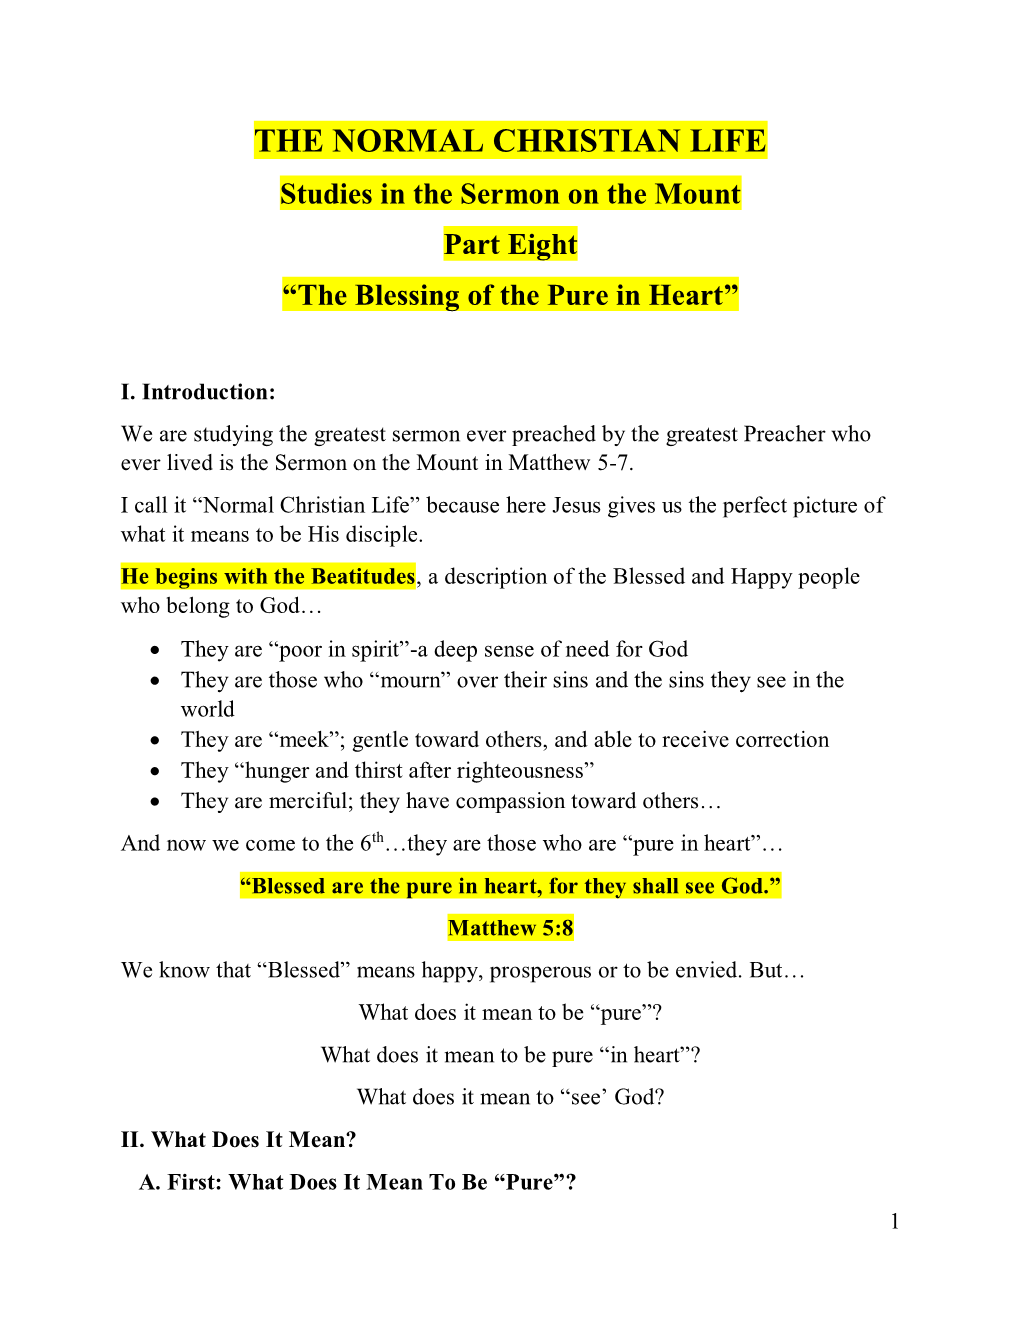 THE NORMAL CHRISTIAN LIFE Studies in the Sermon on the Mount Part Eight “The Blessing of the Pure in Heart”